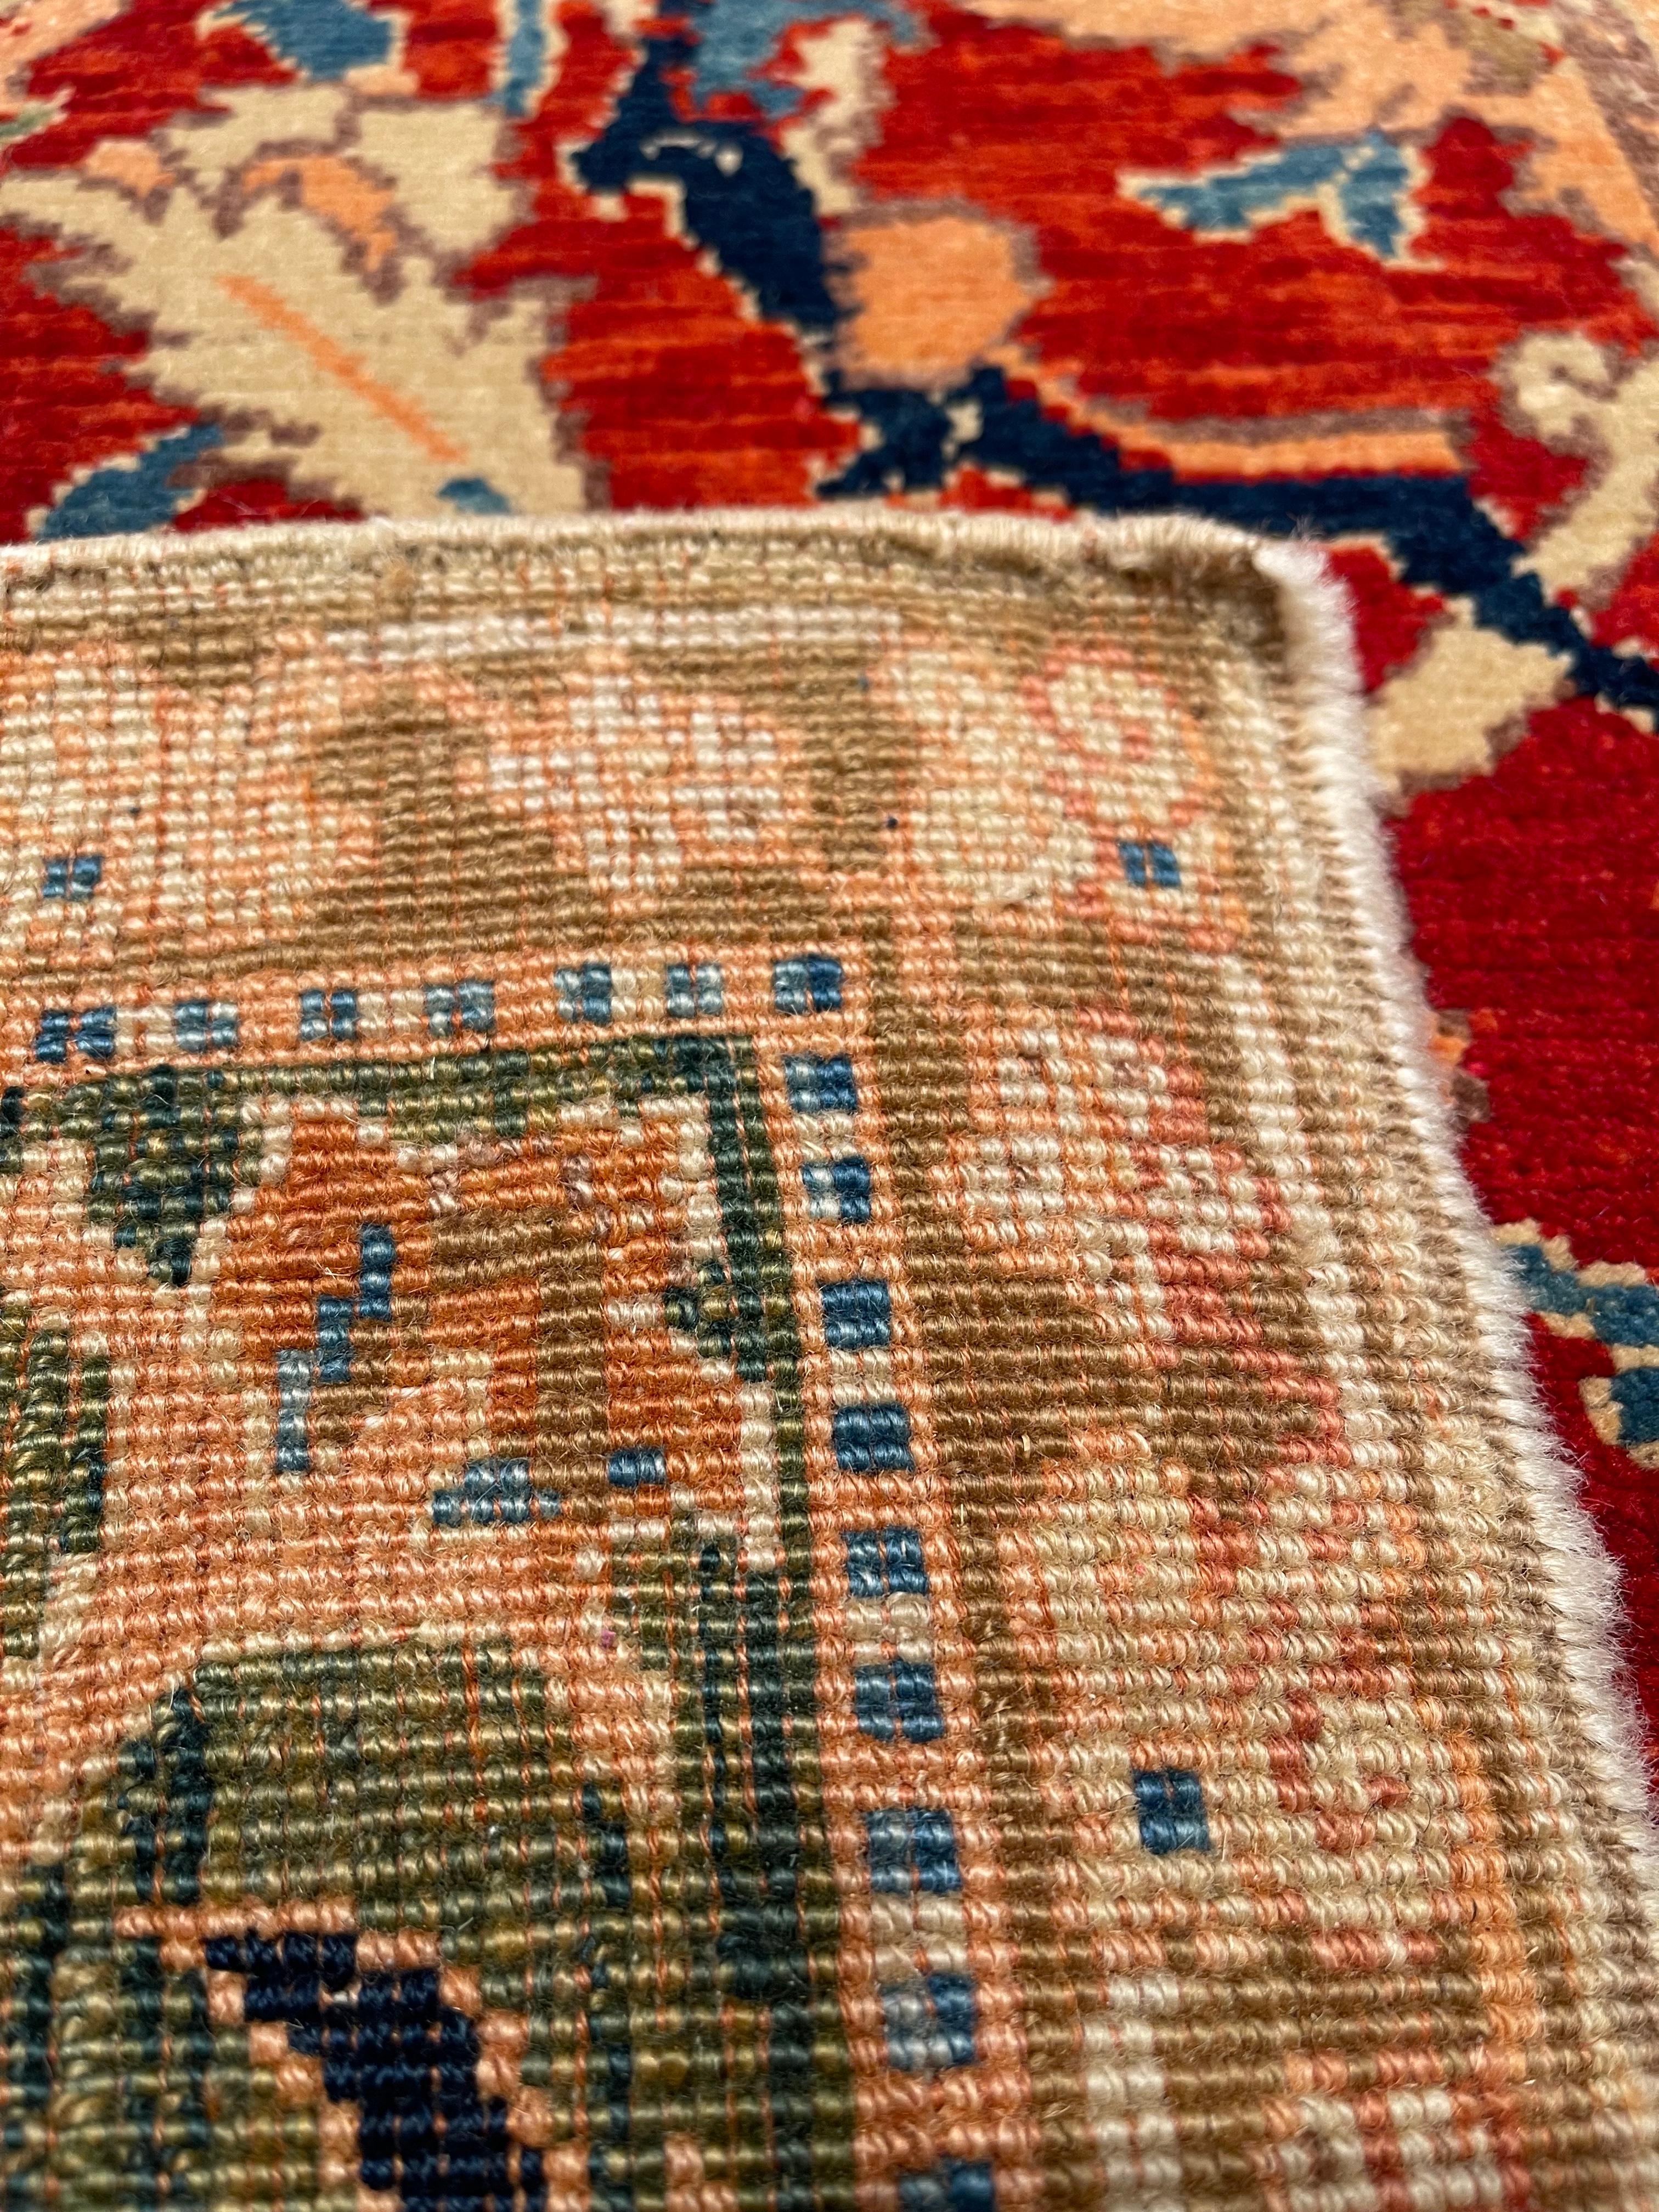 Vegetable Dyed Ararat Rugs Polonaise Carpet, 17th Century Museum Piece Revival, Natural Dyed For Sale